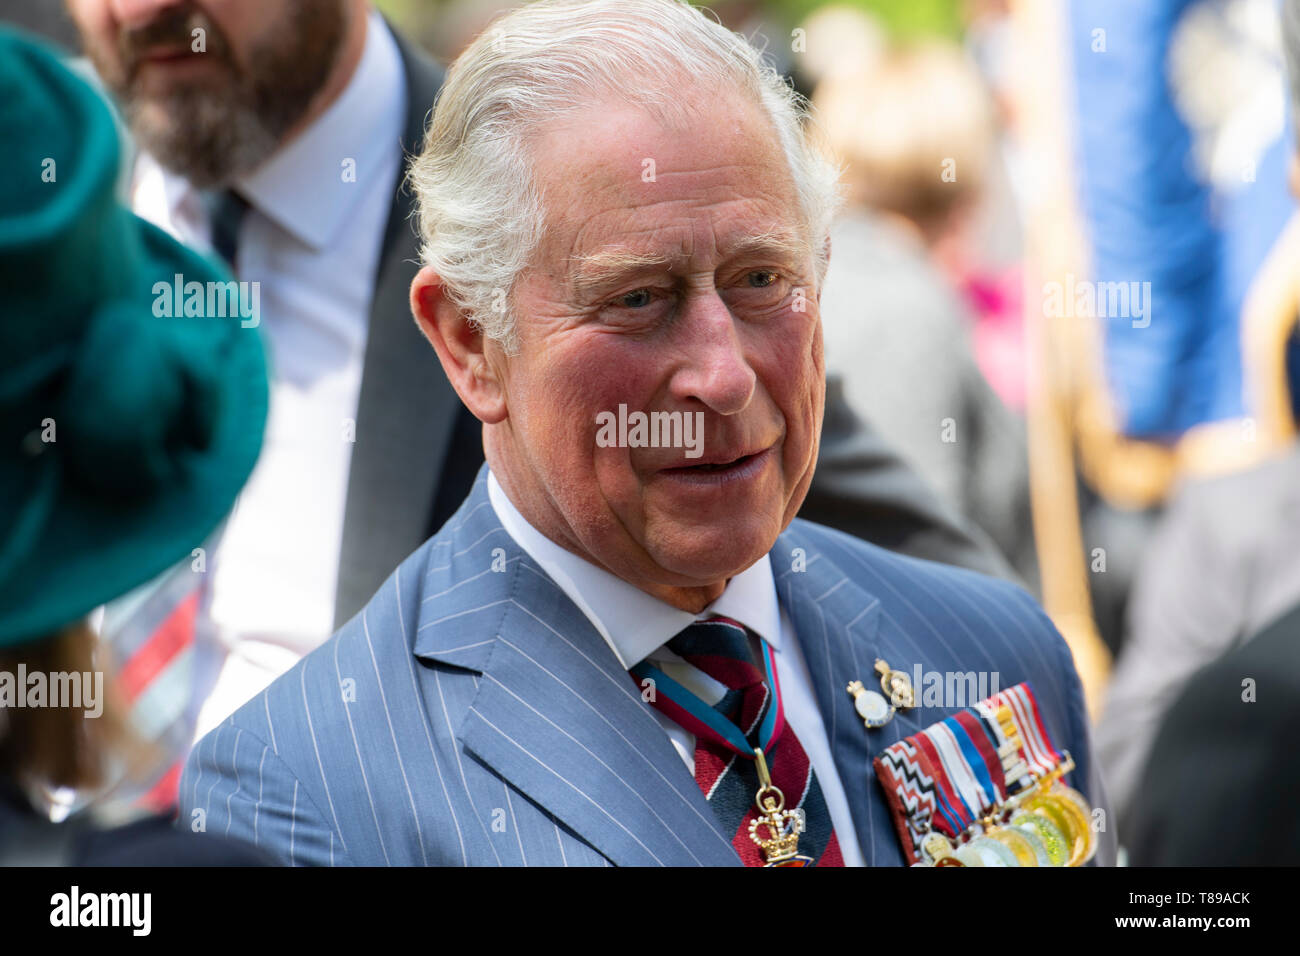 Hyde Park London, UK. 12th May 2019. HRH The Prince of Wales, Field Marshal, Colonel in Chief 1st The Queen’s Dragoon Guards, takes the salute at the Combined Cavalry Old Comrades Association 95th annual parade and service. The parade is commanded by Lieutenant-General Sir Simon Mayall, KCB, CB, Colonel of 1st The Queens Dragoon Guards who are the sponsor regiment of this year’s event. Credit: Malcolm Park/Alamy Live News. Stock Photo